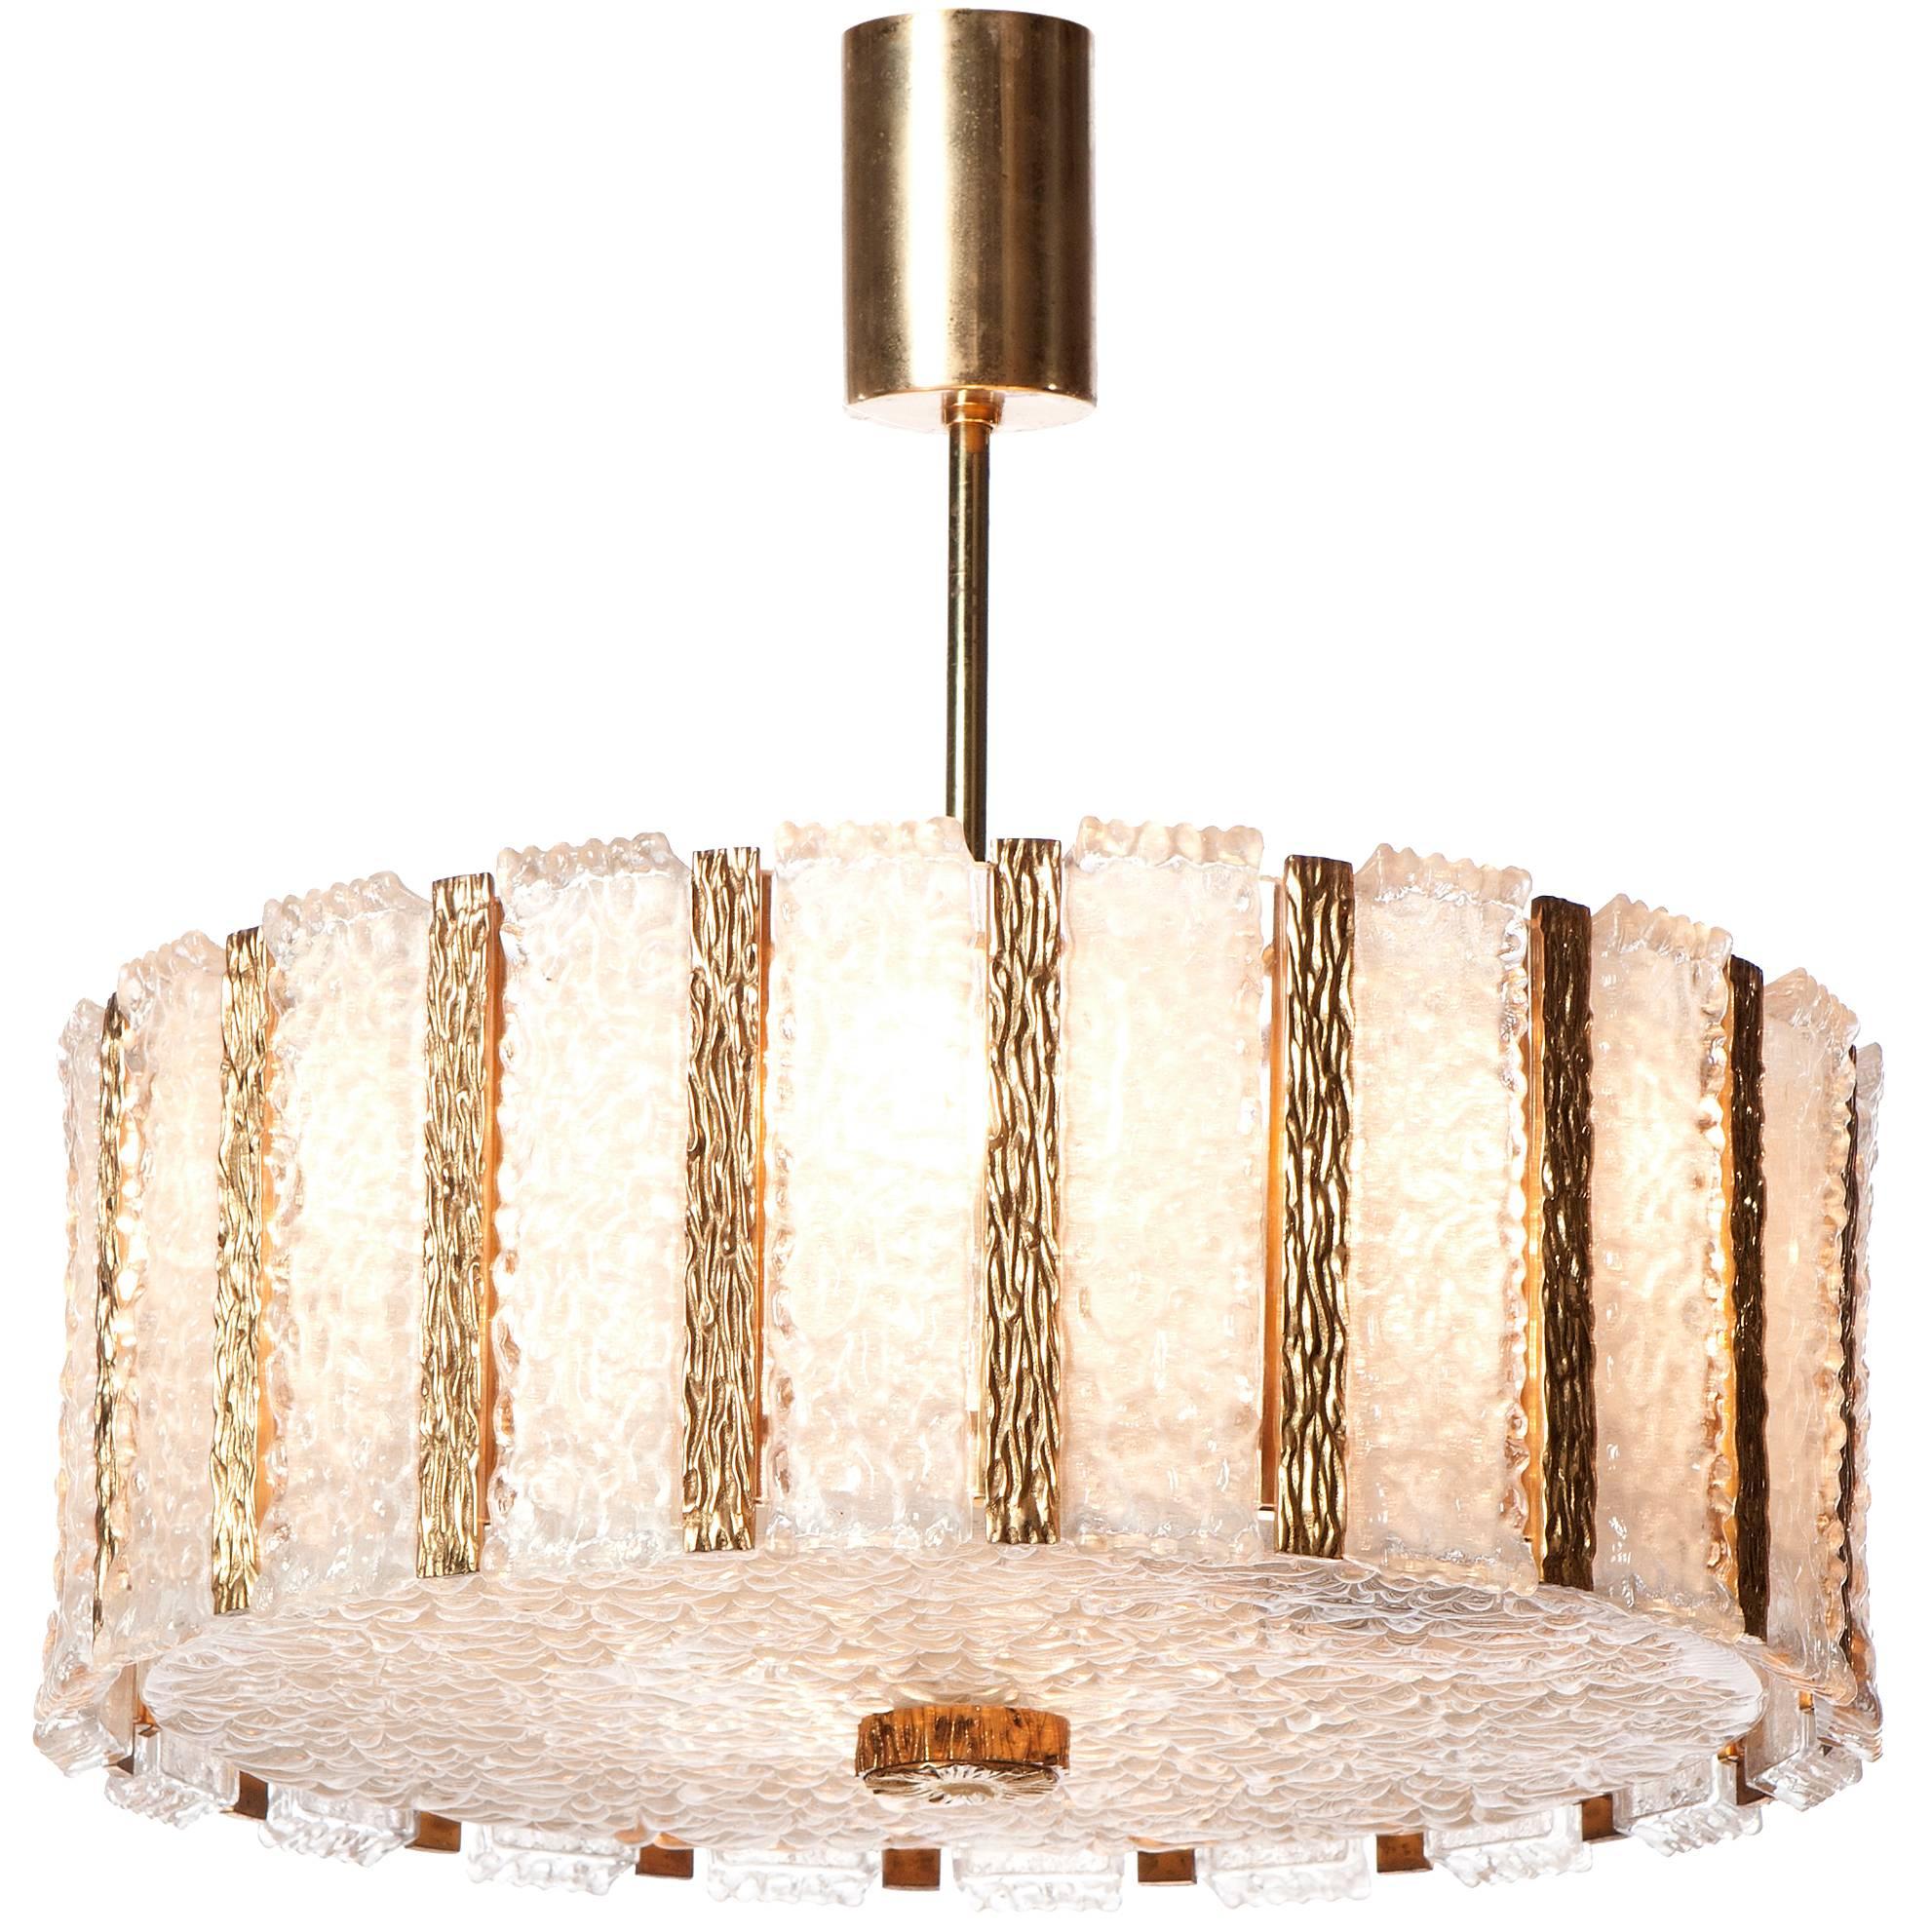 1950s large Nine-Light Gilt Brass and Frosted Glass Chandelier by Kalmar